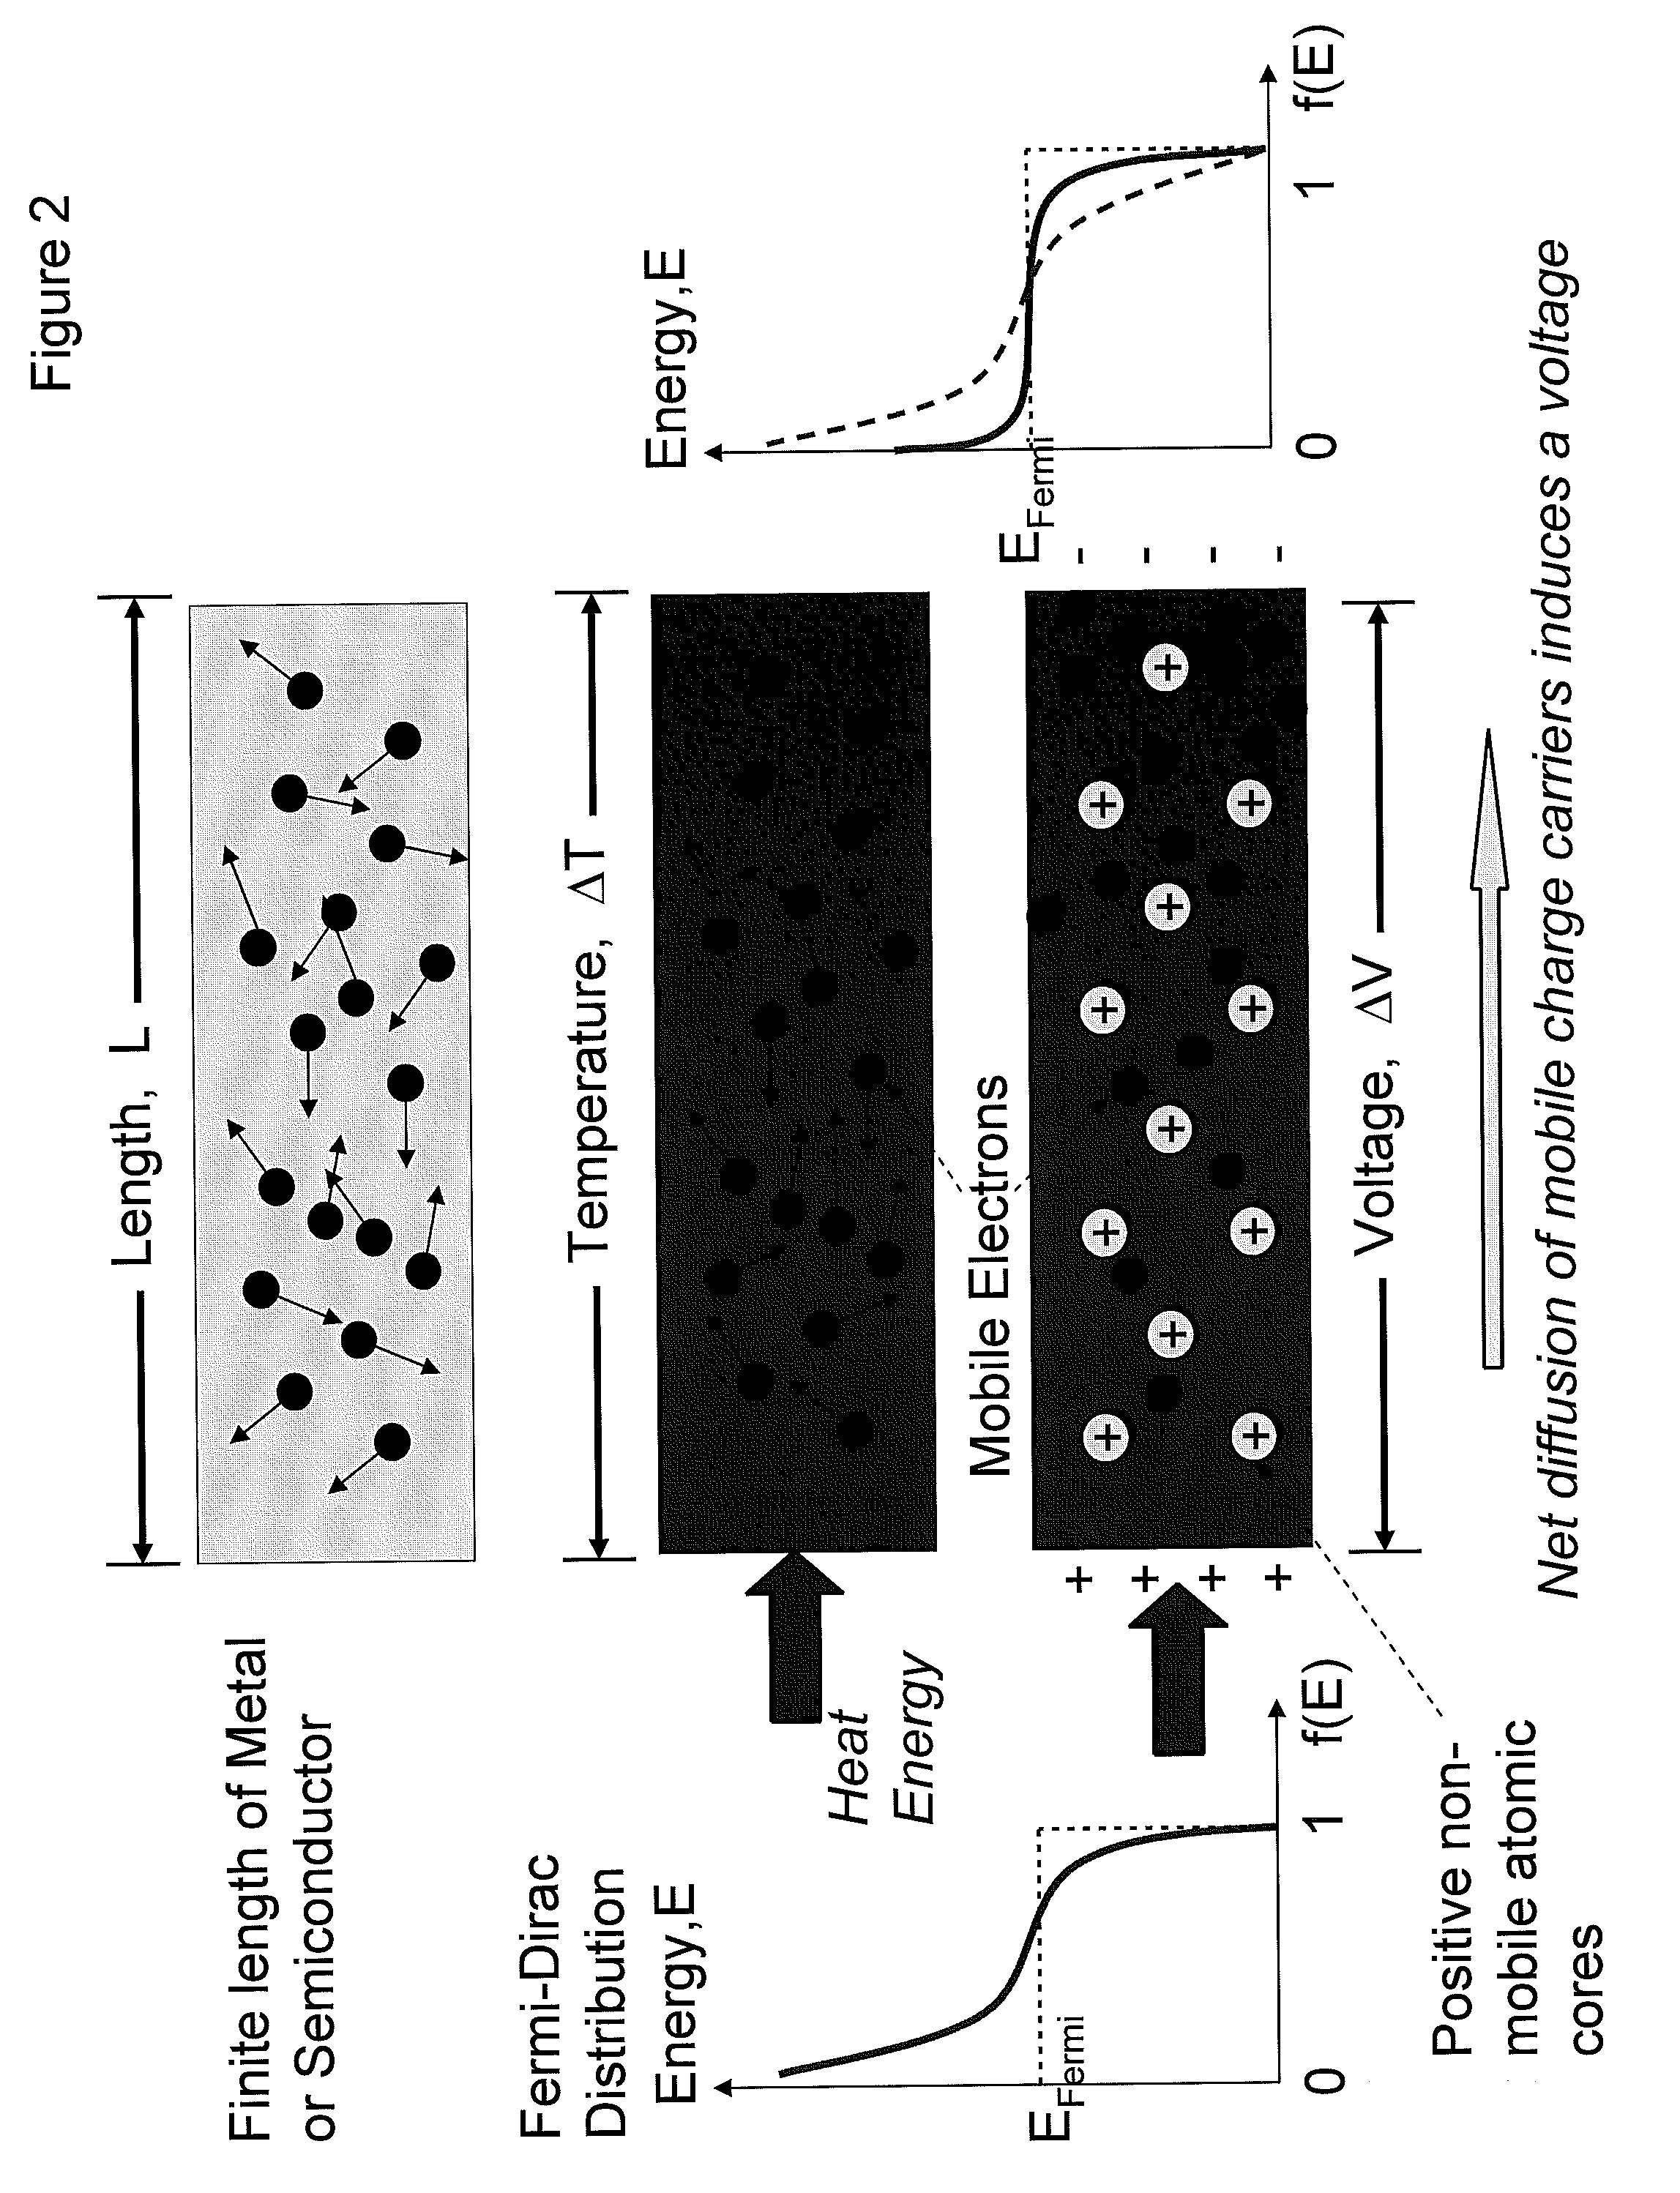 Thermoelectric and pyroelectric energy conversion devices